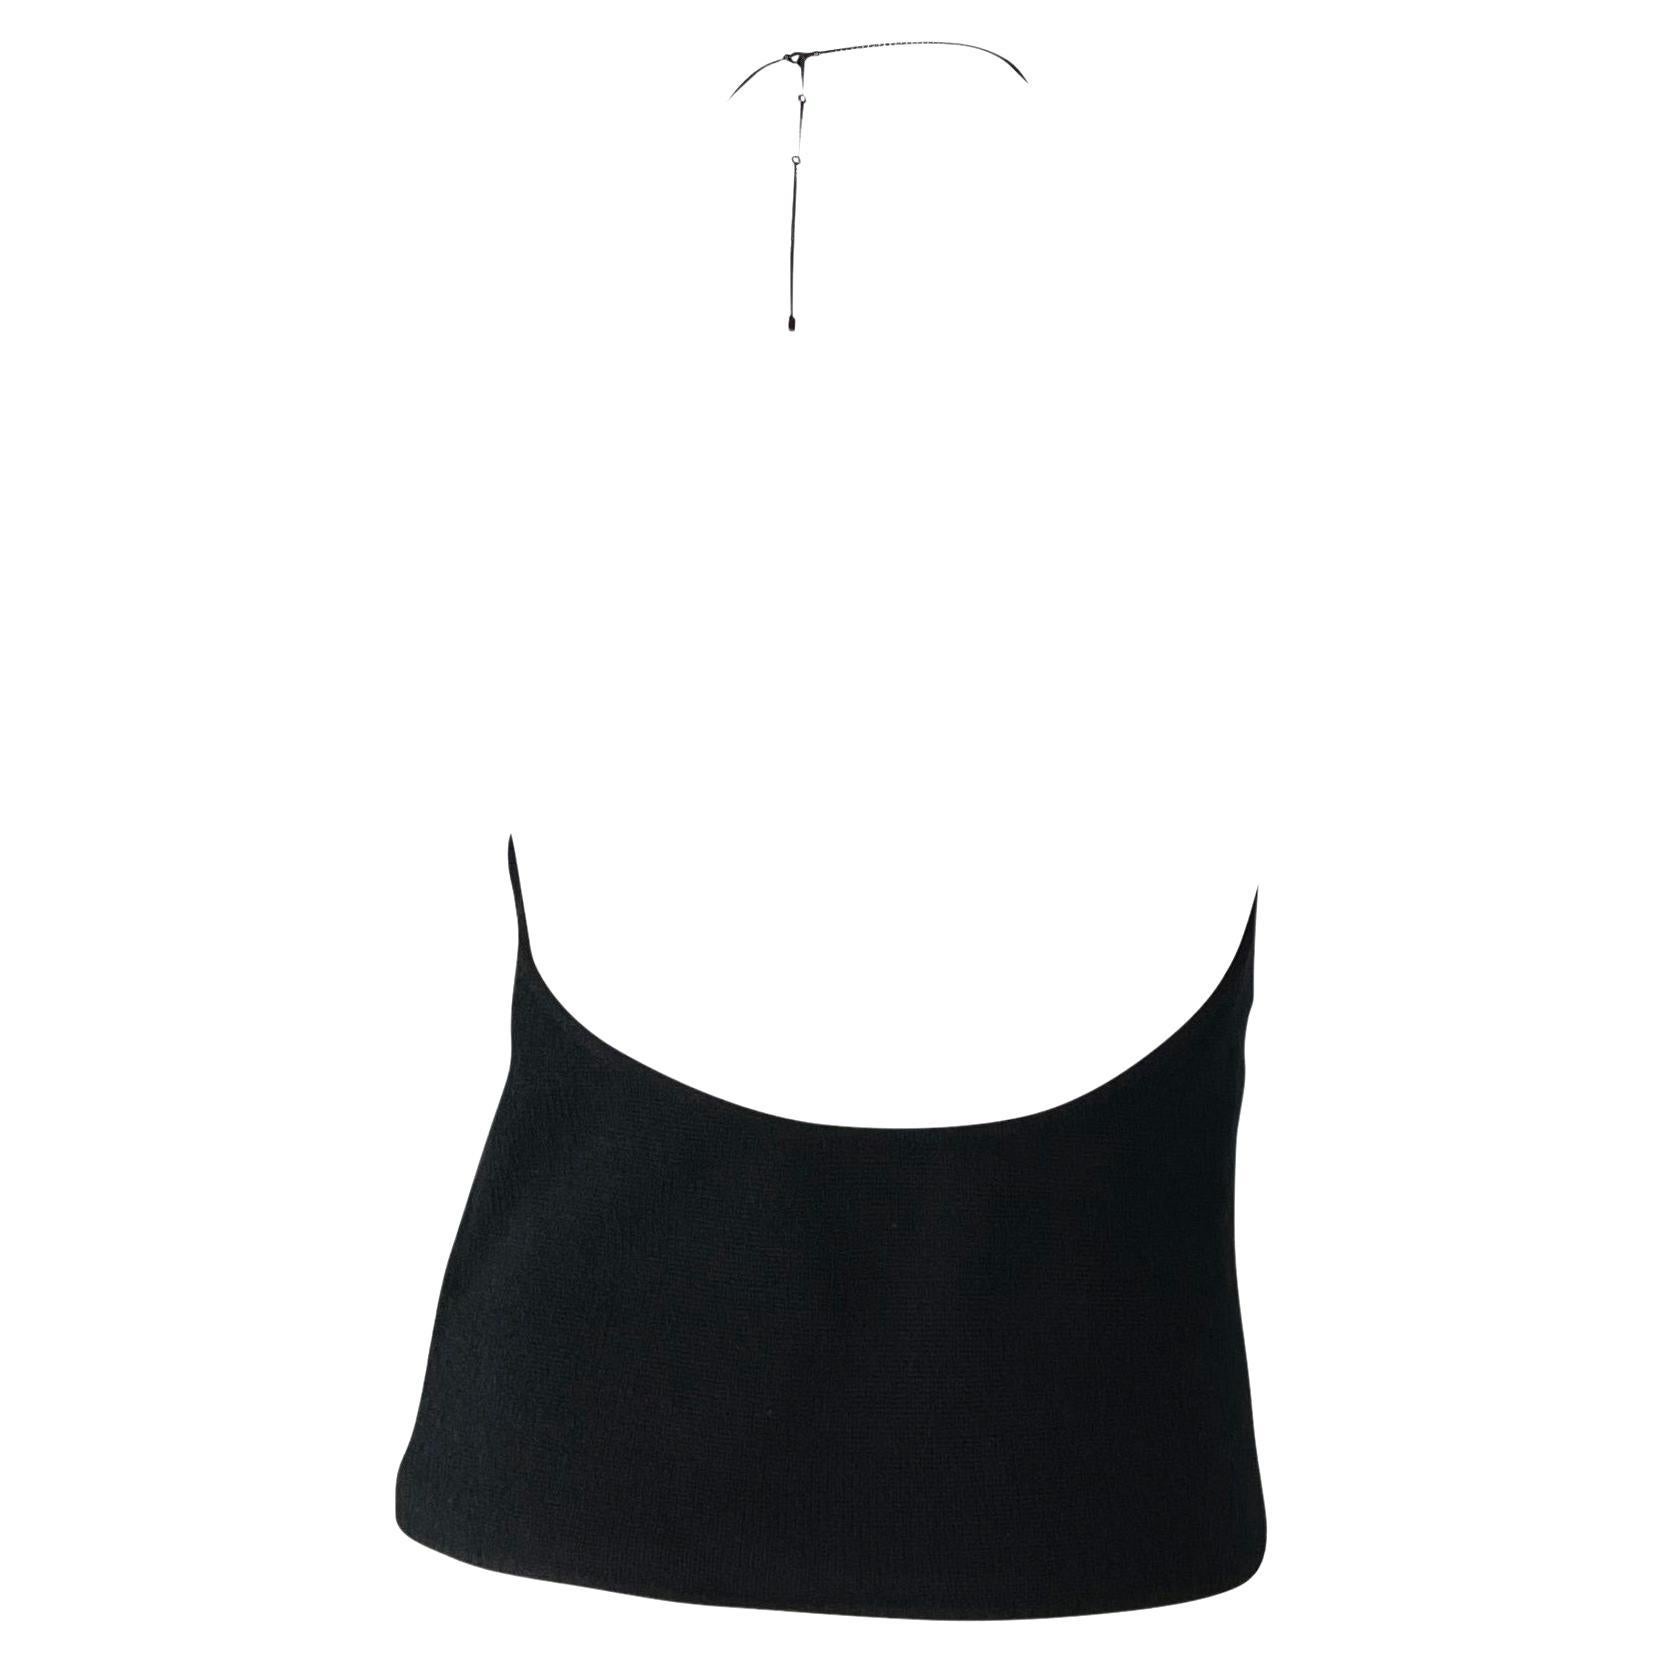 Noir Fin des années 1990 Tom Ford Gucci by Tom Ford Backless Cashmere Chain Sweater Top Black en vente